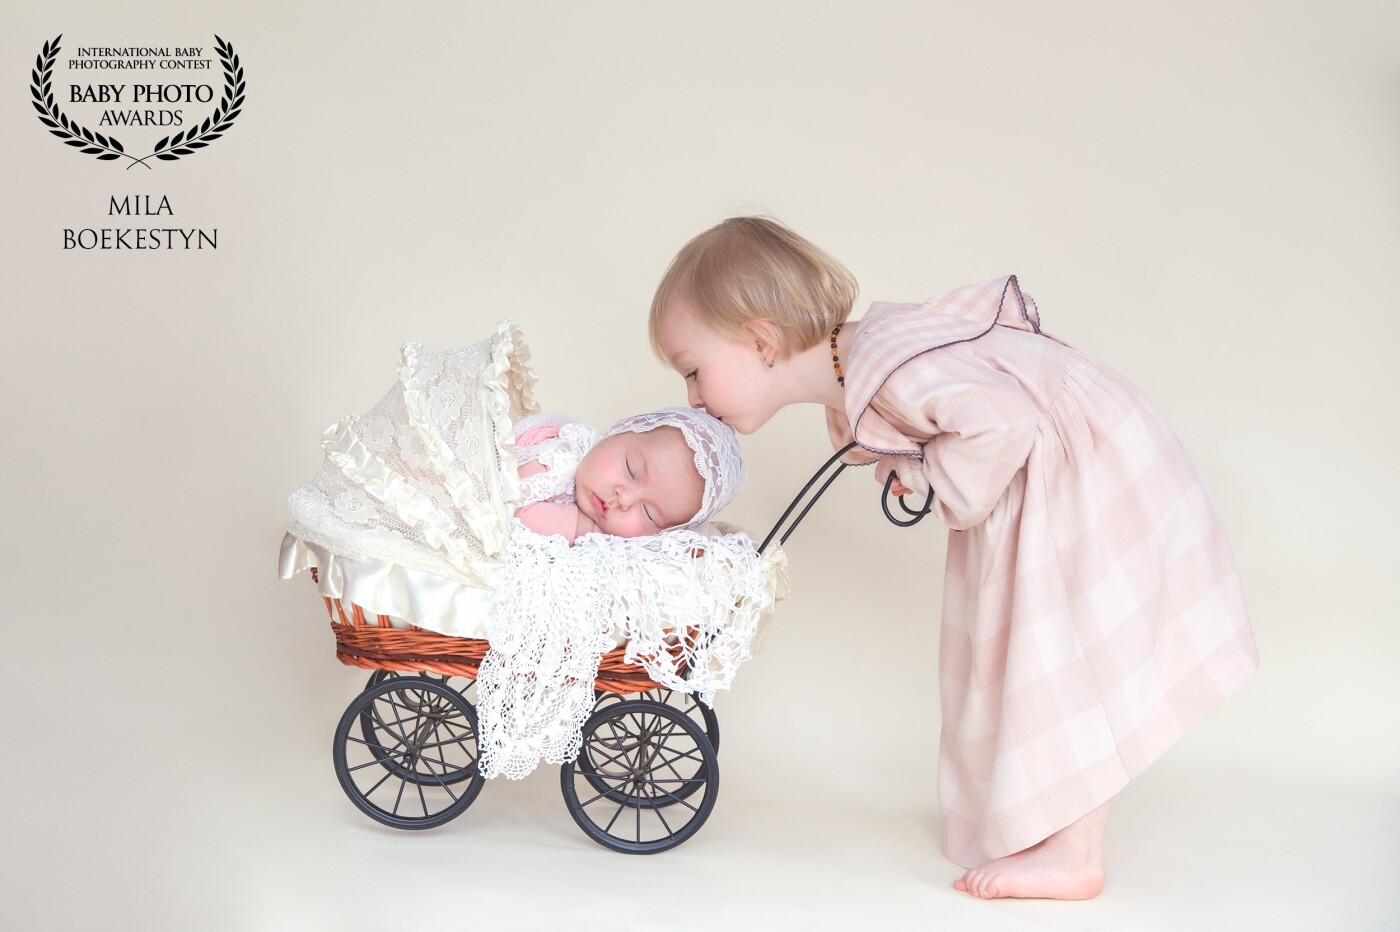 "Sister's love"  <br />
This baby girl was already 2 months old during the photoshoot, but she was sleeping better than any newborn and her big sister is only 18 months old herself was very  gentle and cooperative.  "Kiss your baby sister" and so she did!